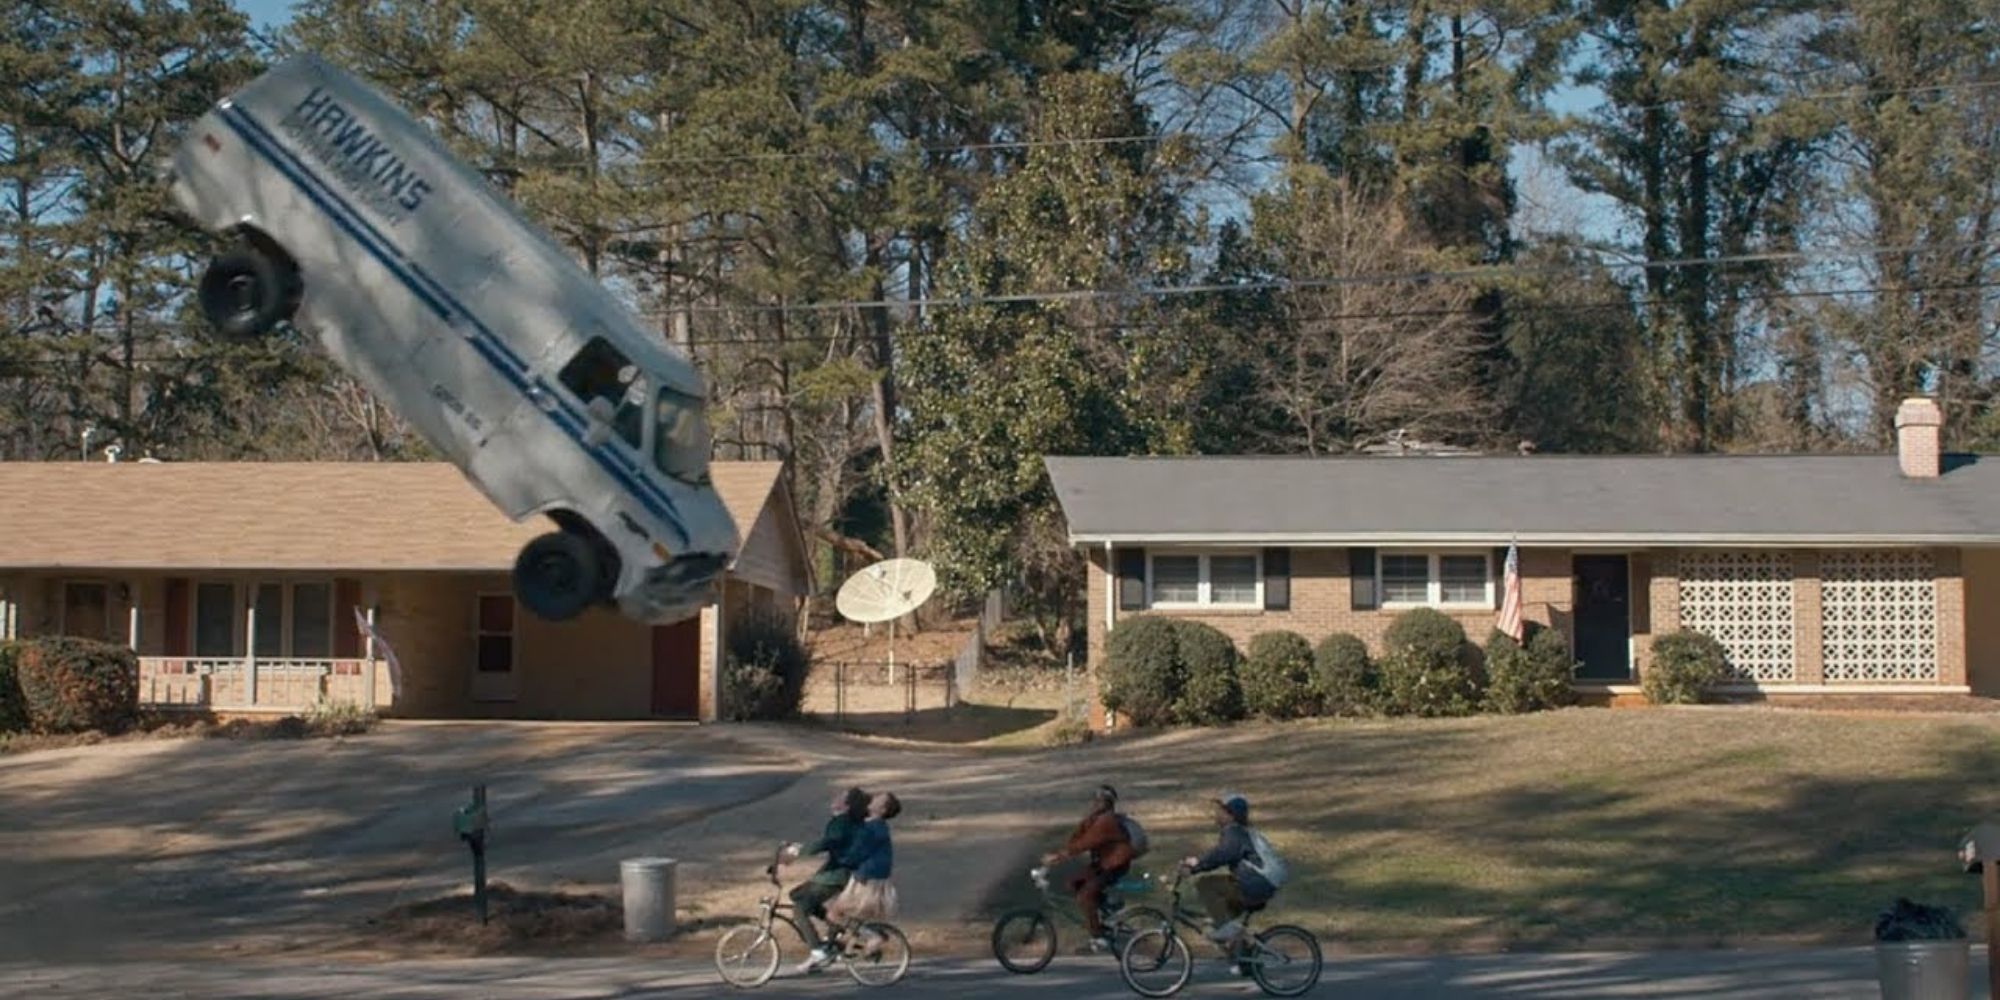 Eleven uses her powers to flip the van in Stranger Things